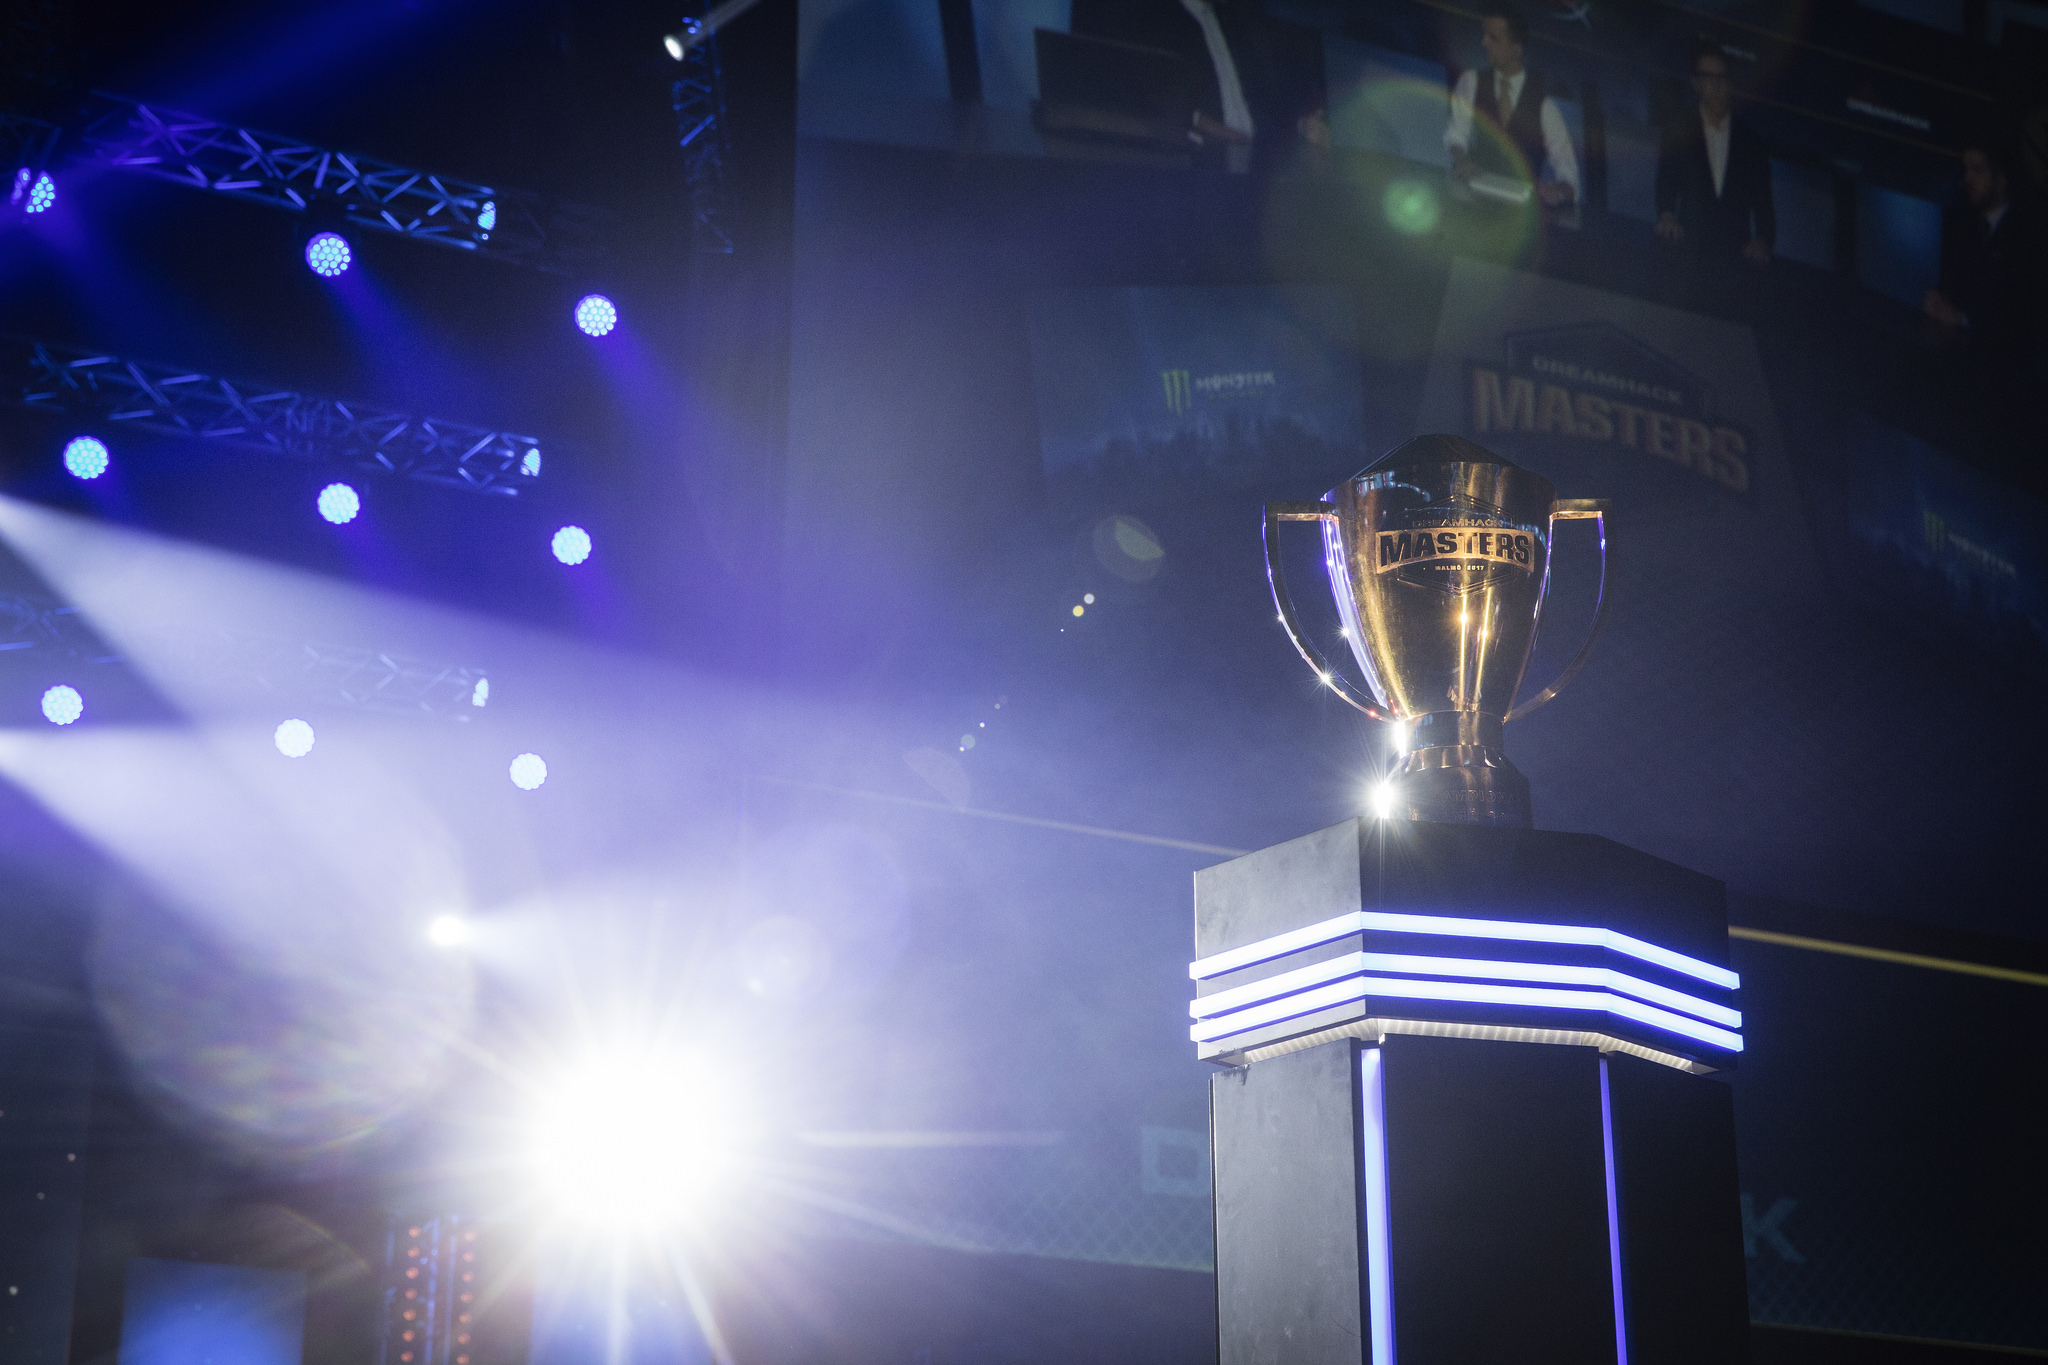 DreamHack unbans cheaters and match-fixers—former iBP and ... - 2048 x 1365 jpeg 732kB